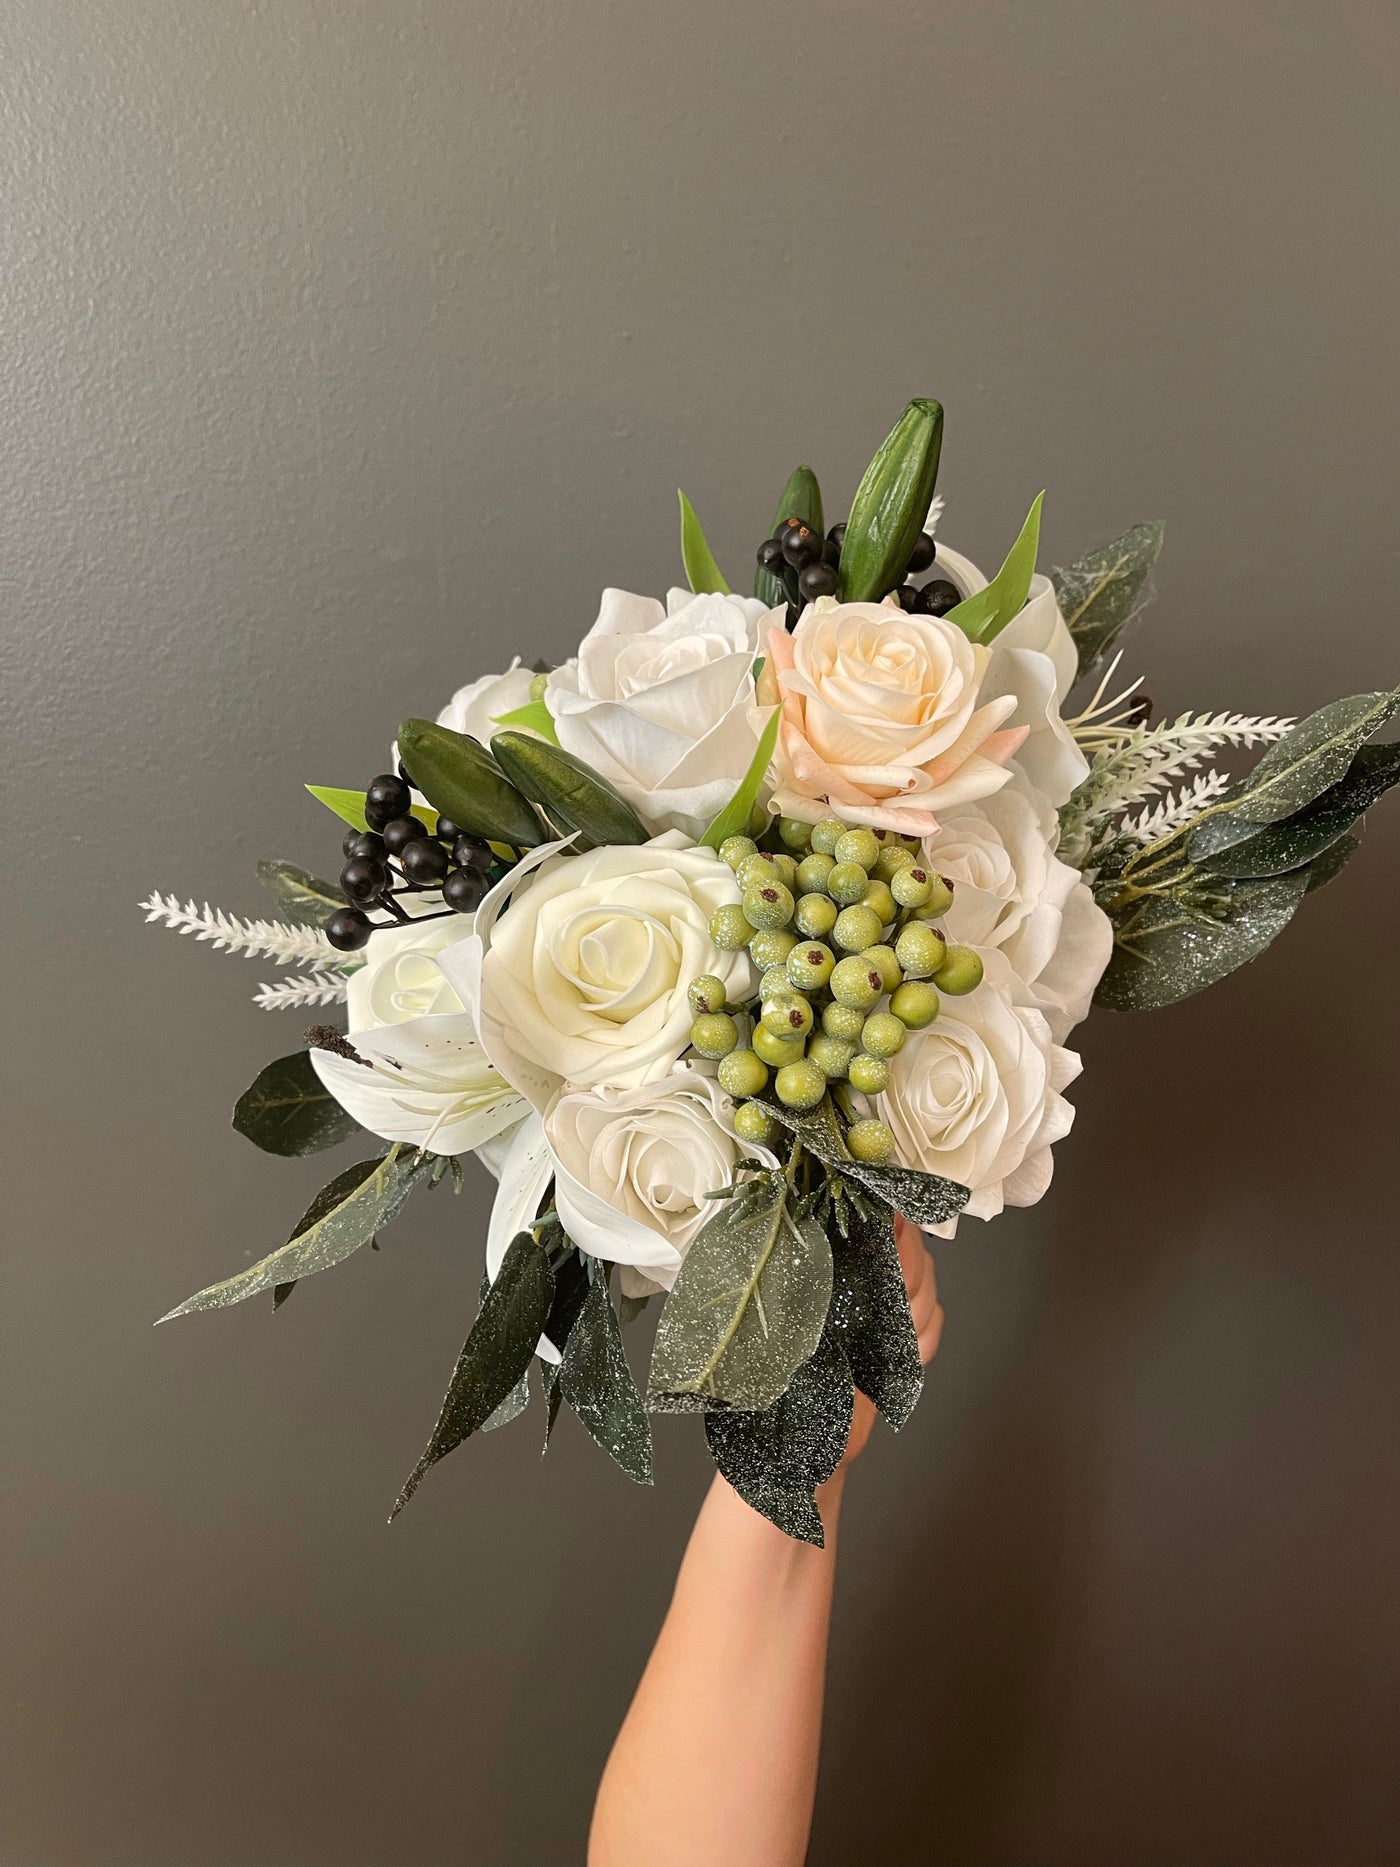 Rent  A Rose- Flower Girl Bouquet- white lilies and roses accented with black and olive green berries. Rent for five days for $35.00